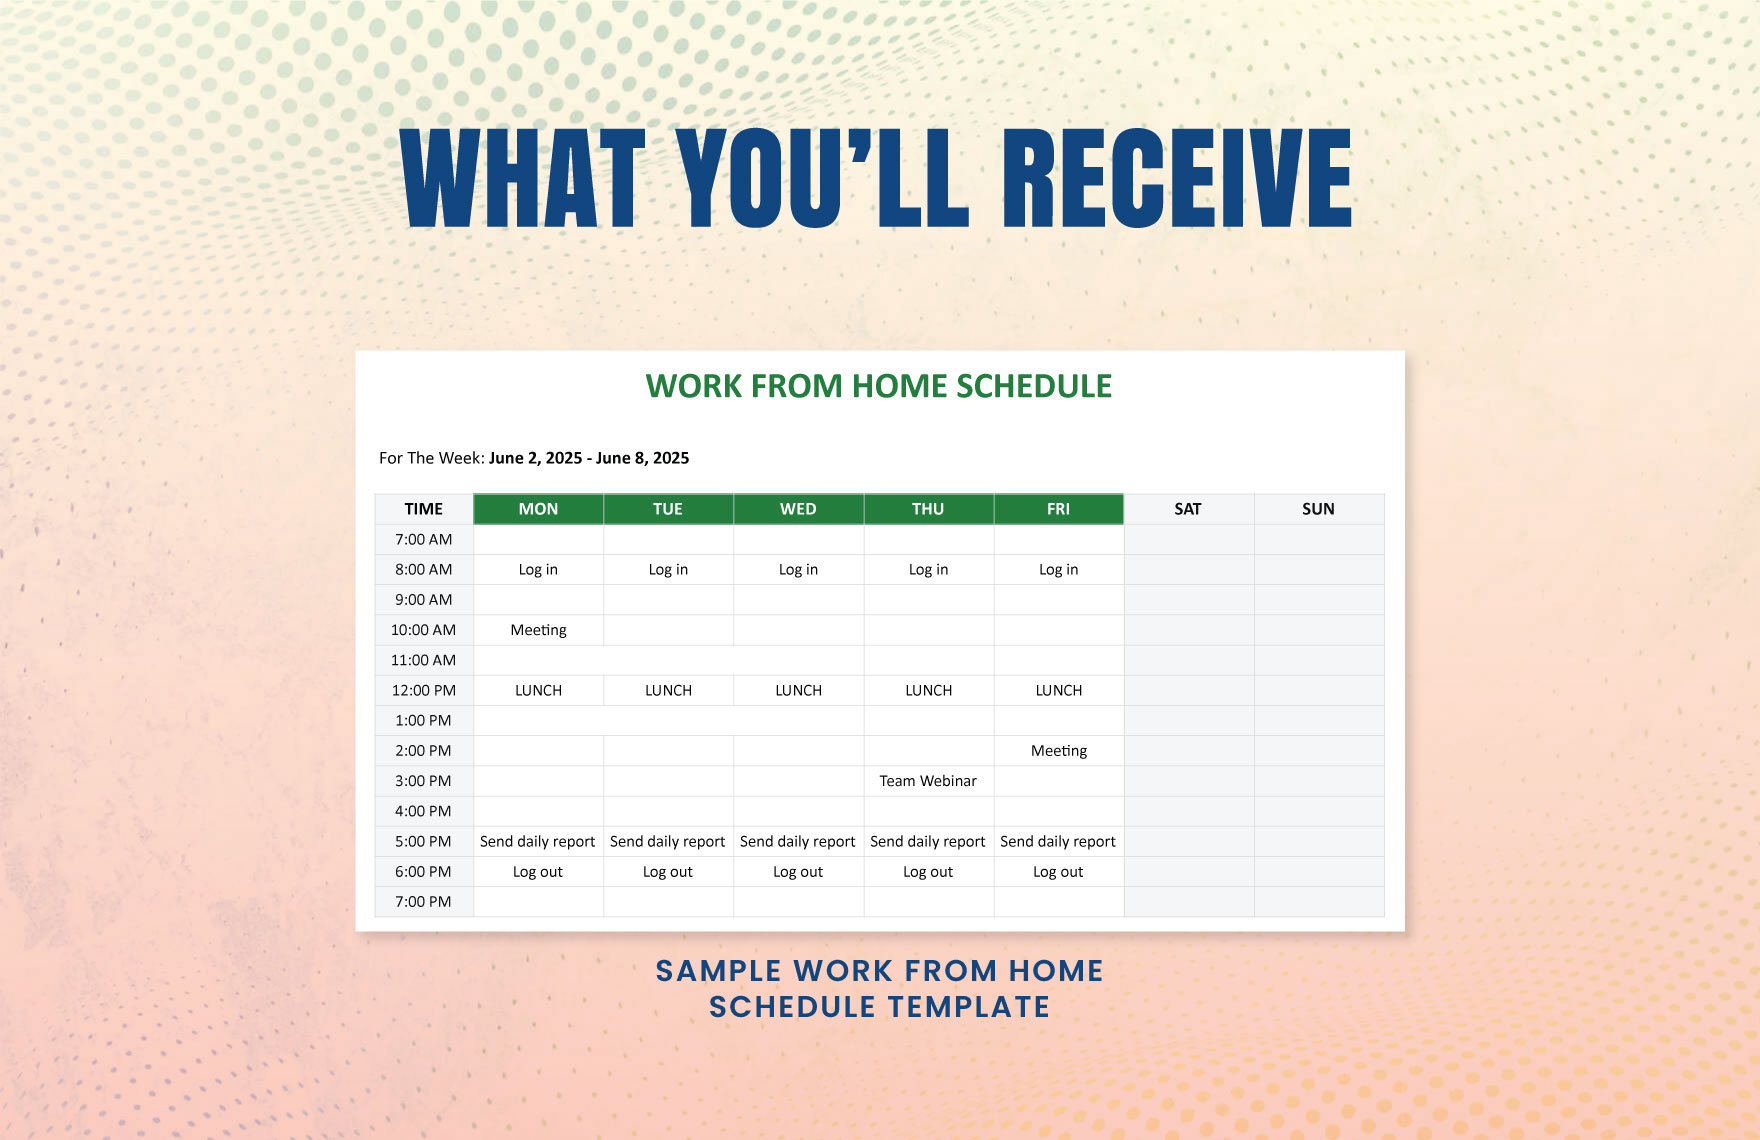 Sample Work From Home Schedule Template